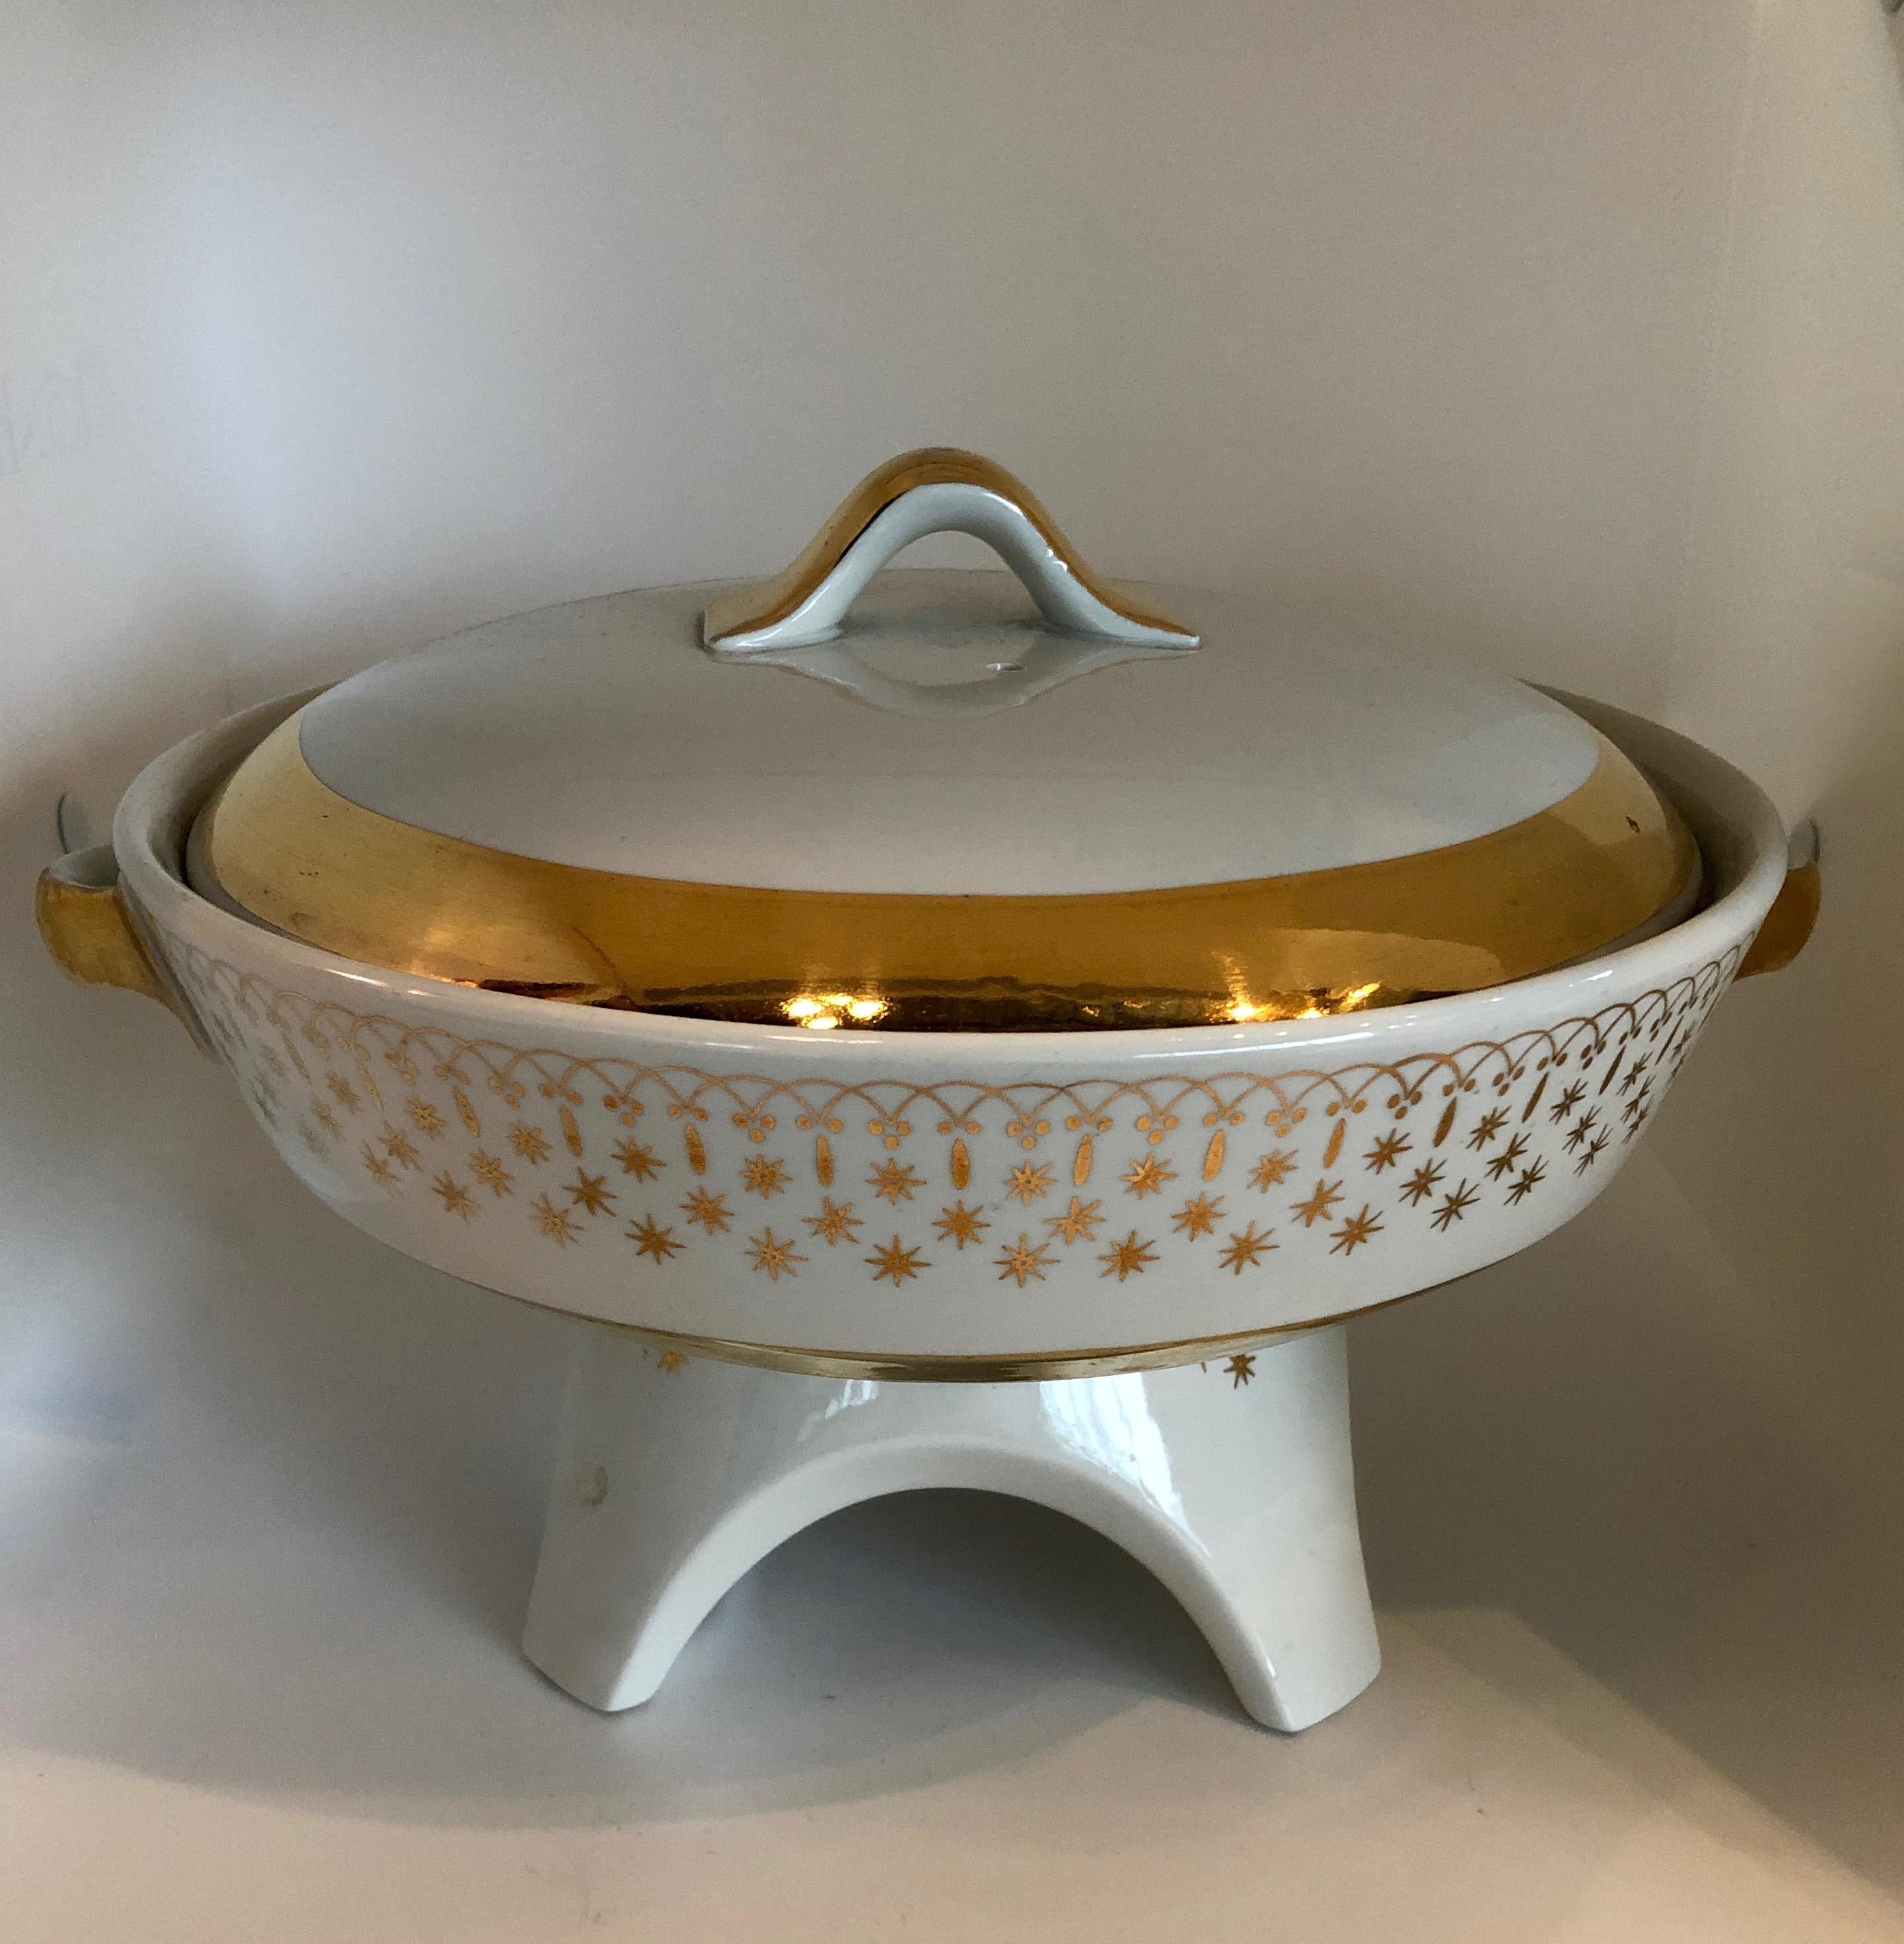 Offered is a Mid-Century Modern beyond gorgeous white and gold gilded porcelain fondue pot and six bowls (outer of gold and inner white) from Pickard and Hall China. The set of six bowls are bone china that has been 